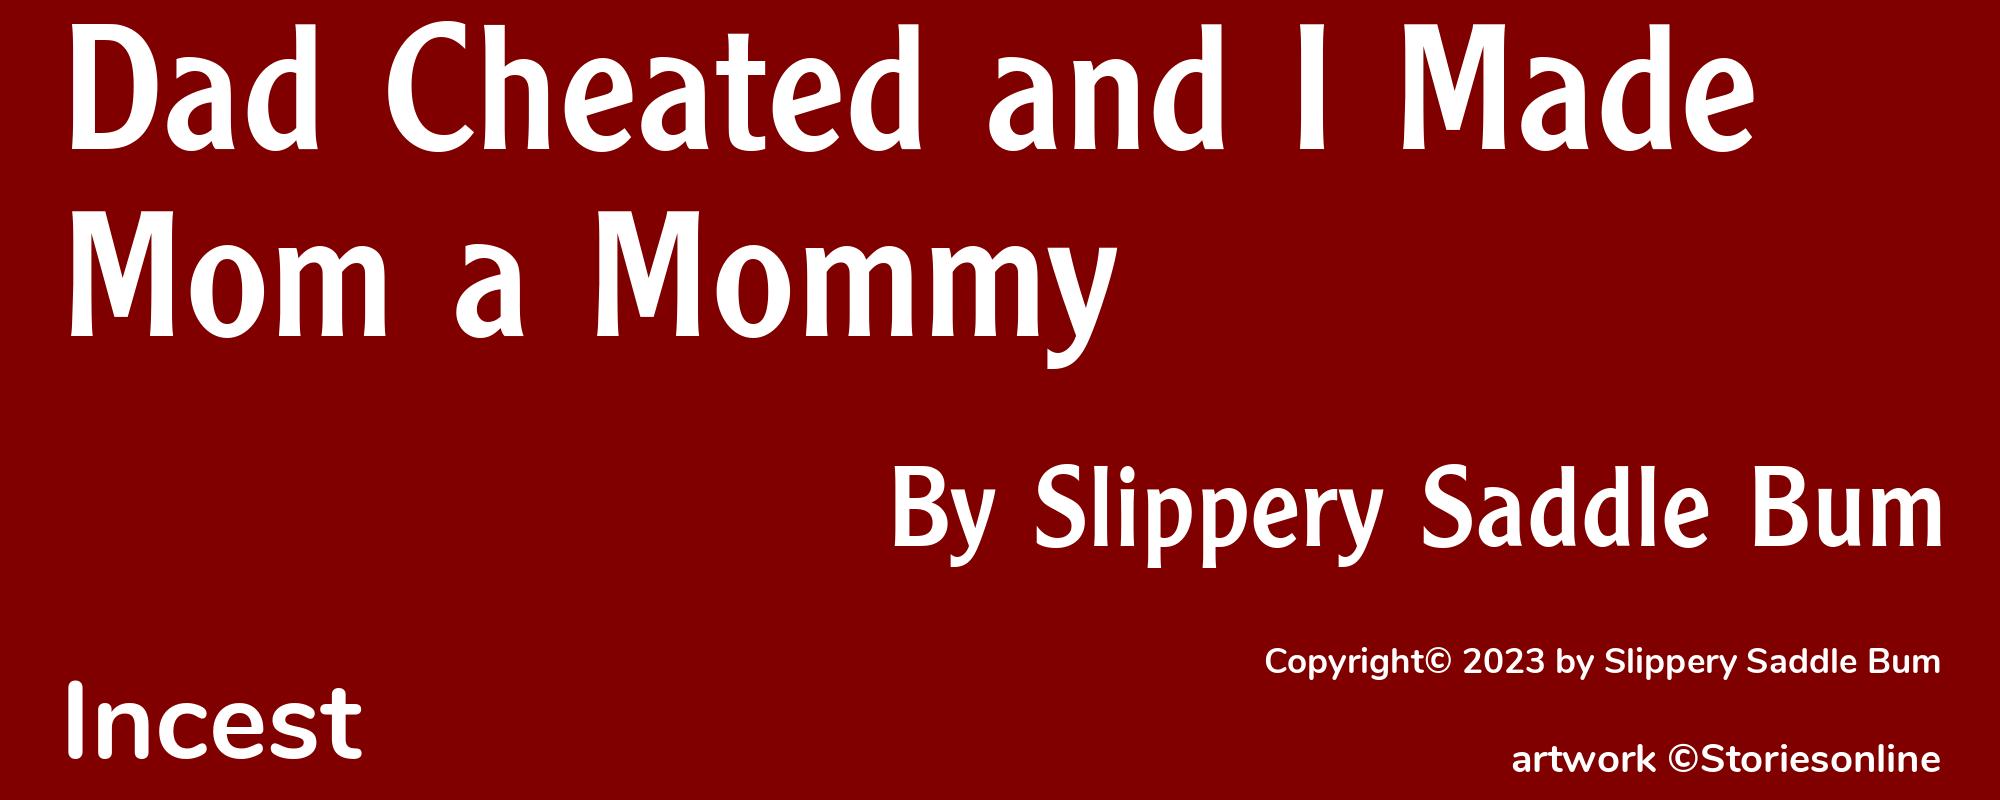 Dad Cheated and I Made Mom a Mommy - Cover